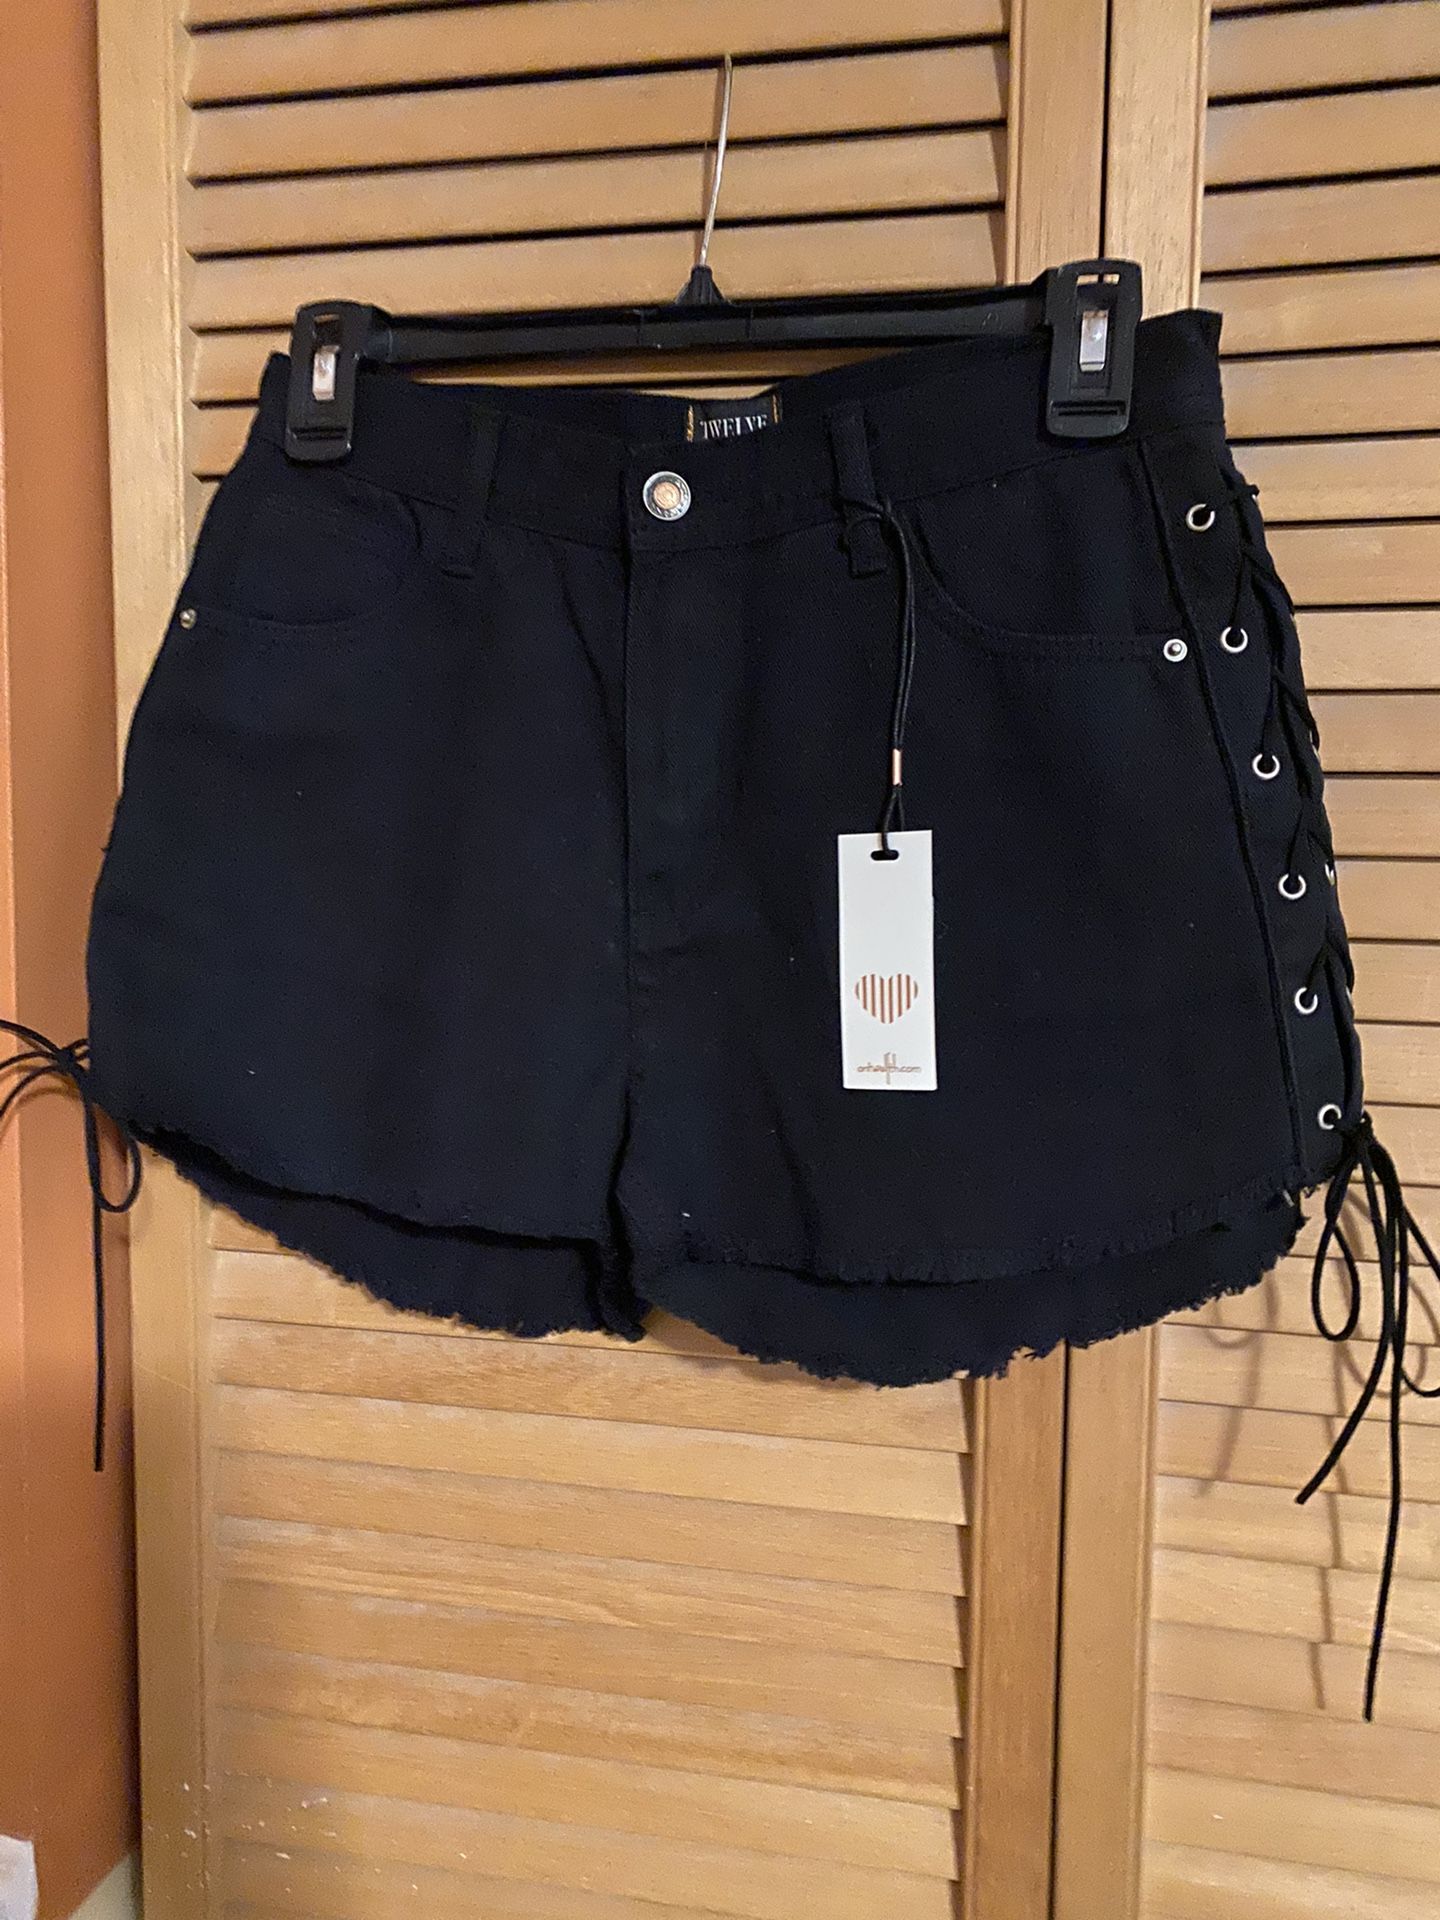 TwelveBy Ontwelfth Lace Up Denim Shorts Size Small